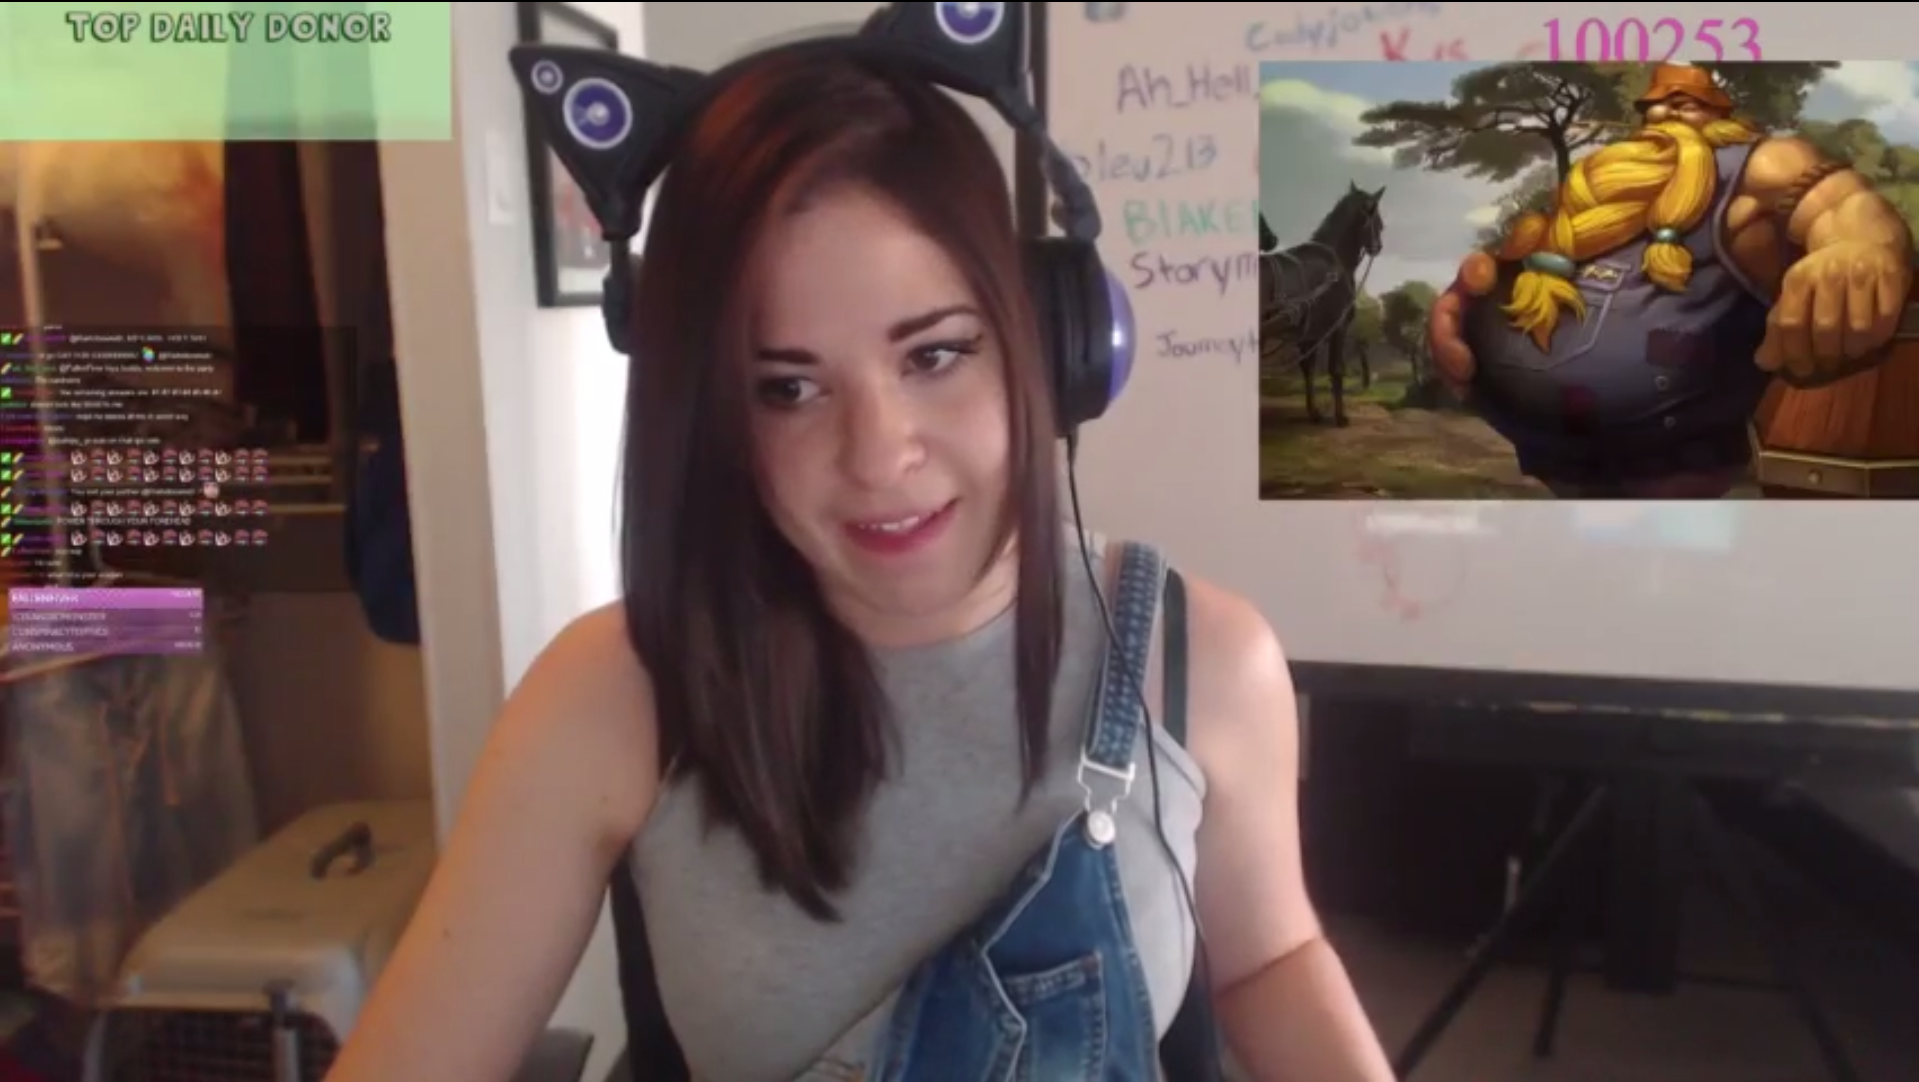 Girl shows tits on stream